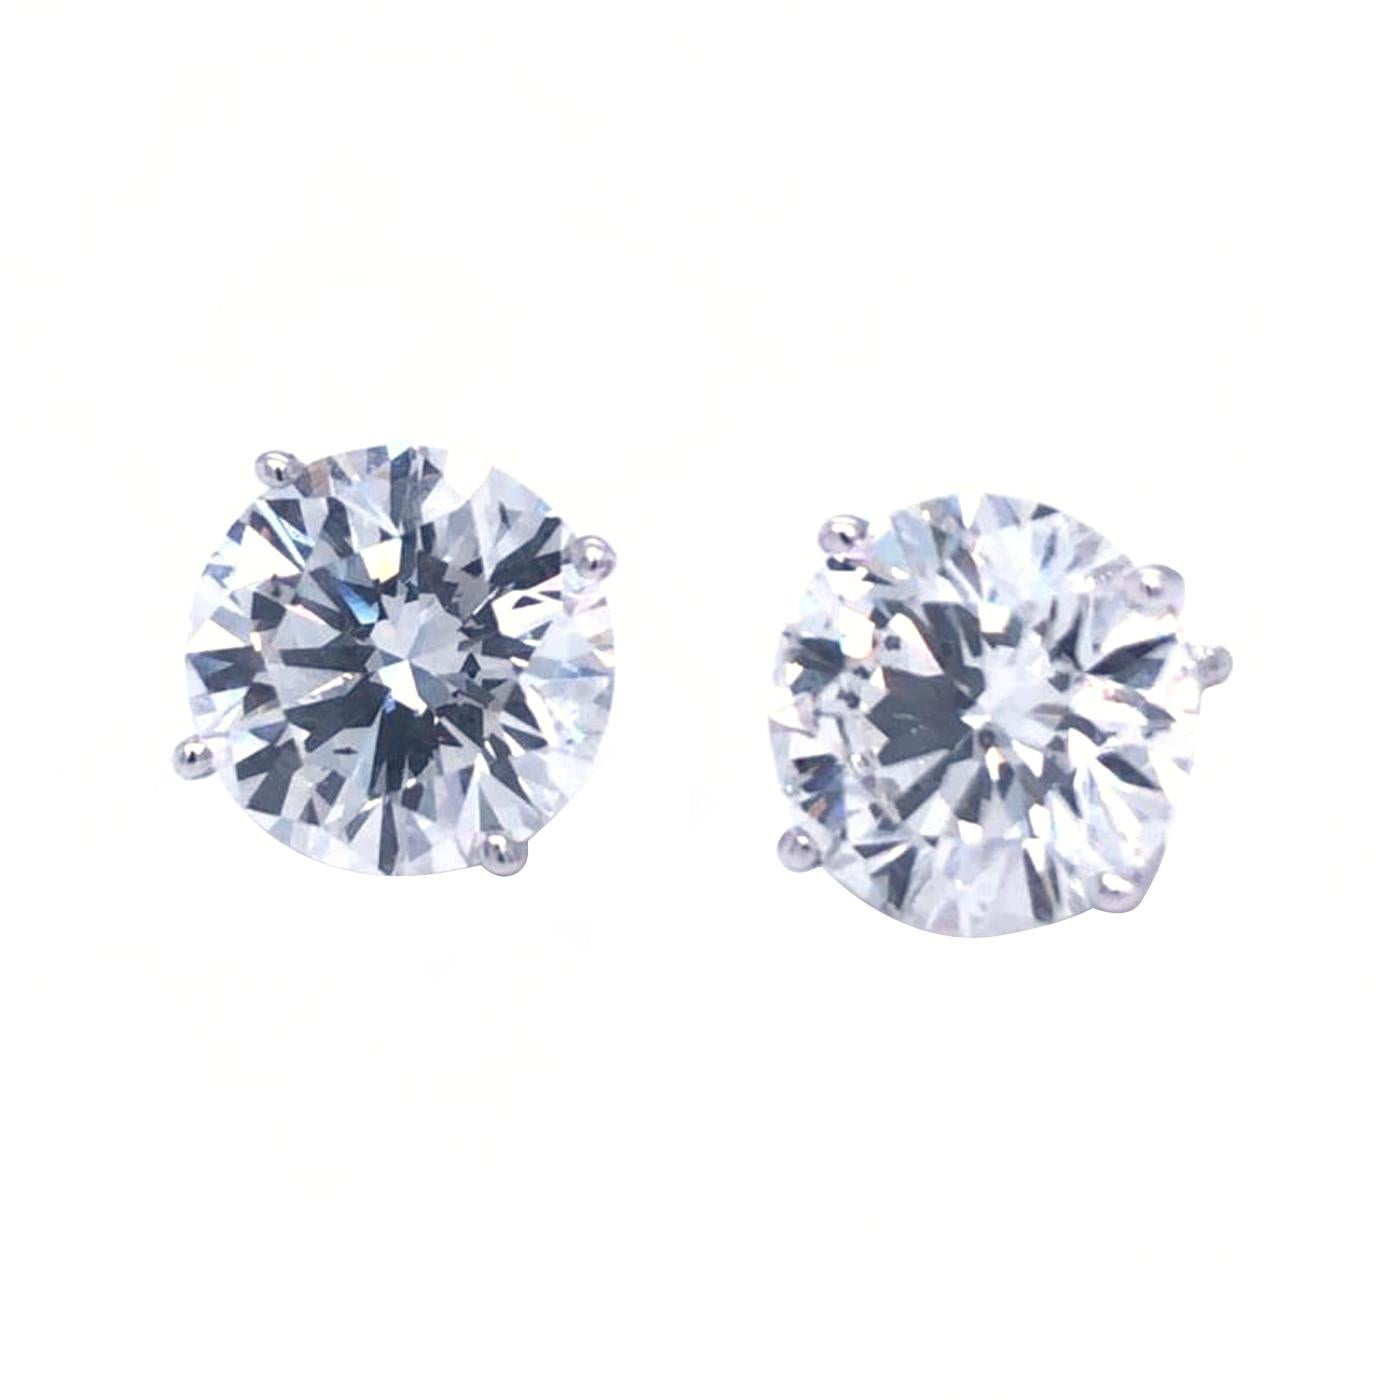 Stunning Diamonds solitaire stud earrings crafted by hand in 18K Gold, showcasing 2 spectacular GIA Certified round brilliant cut diamonds weighing 5.08 carats total,   H color Si1 clarity. These diamonds were carefully selected and perfectly